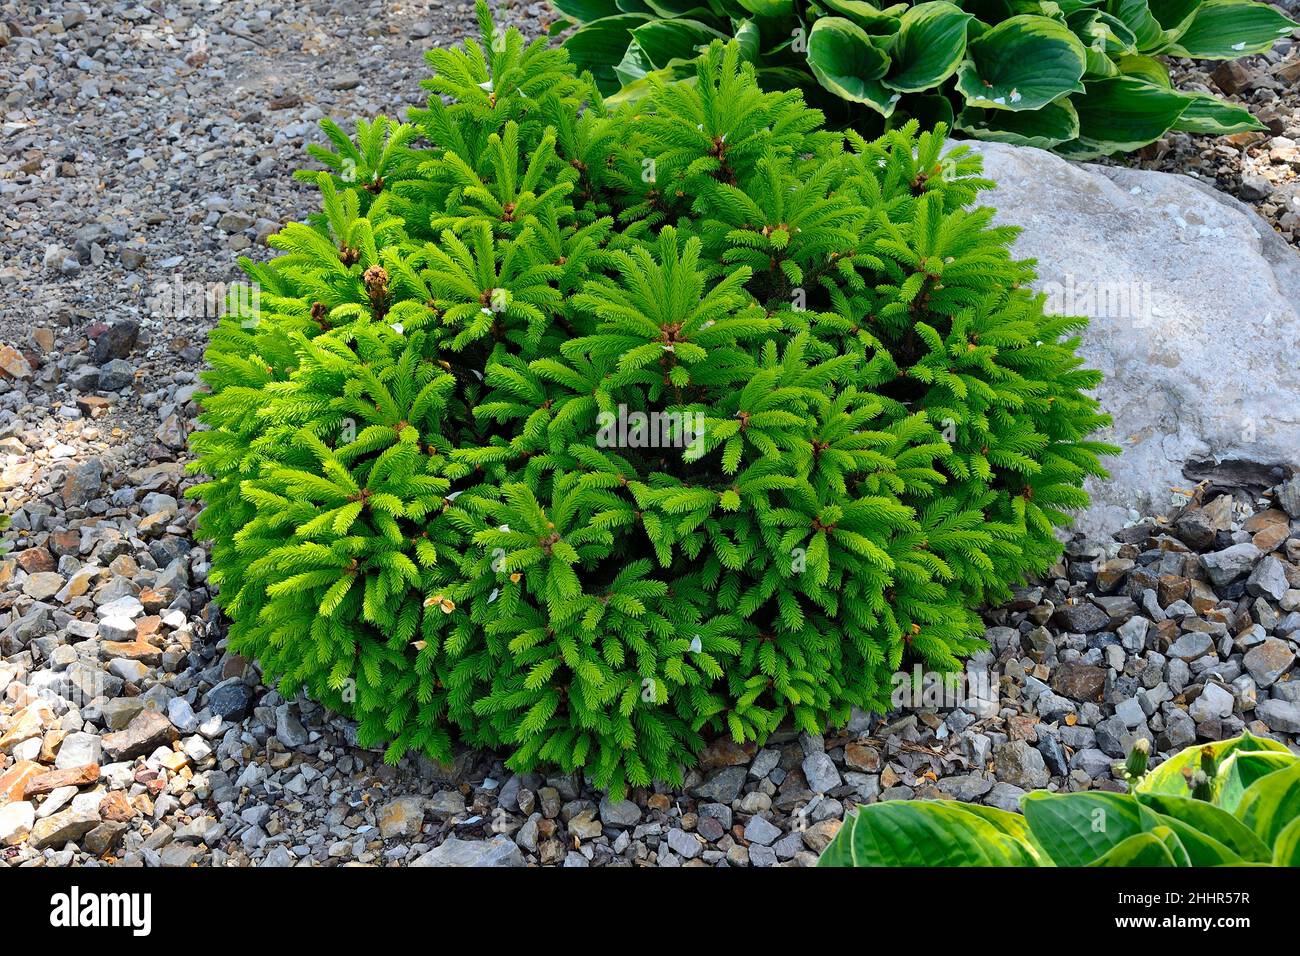 Dwarf spruce Picea abies with soft pale green spring needles on fir shoots. Ornamental evergreen coniferous compact plant for garden landscape design. Stock Photo